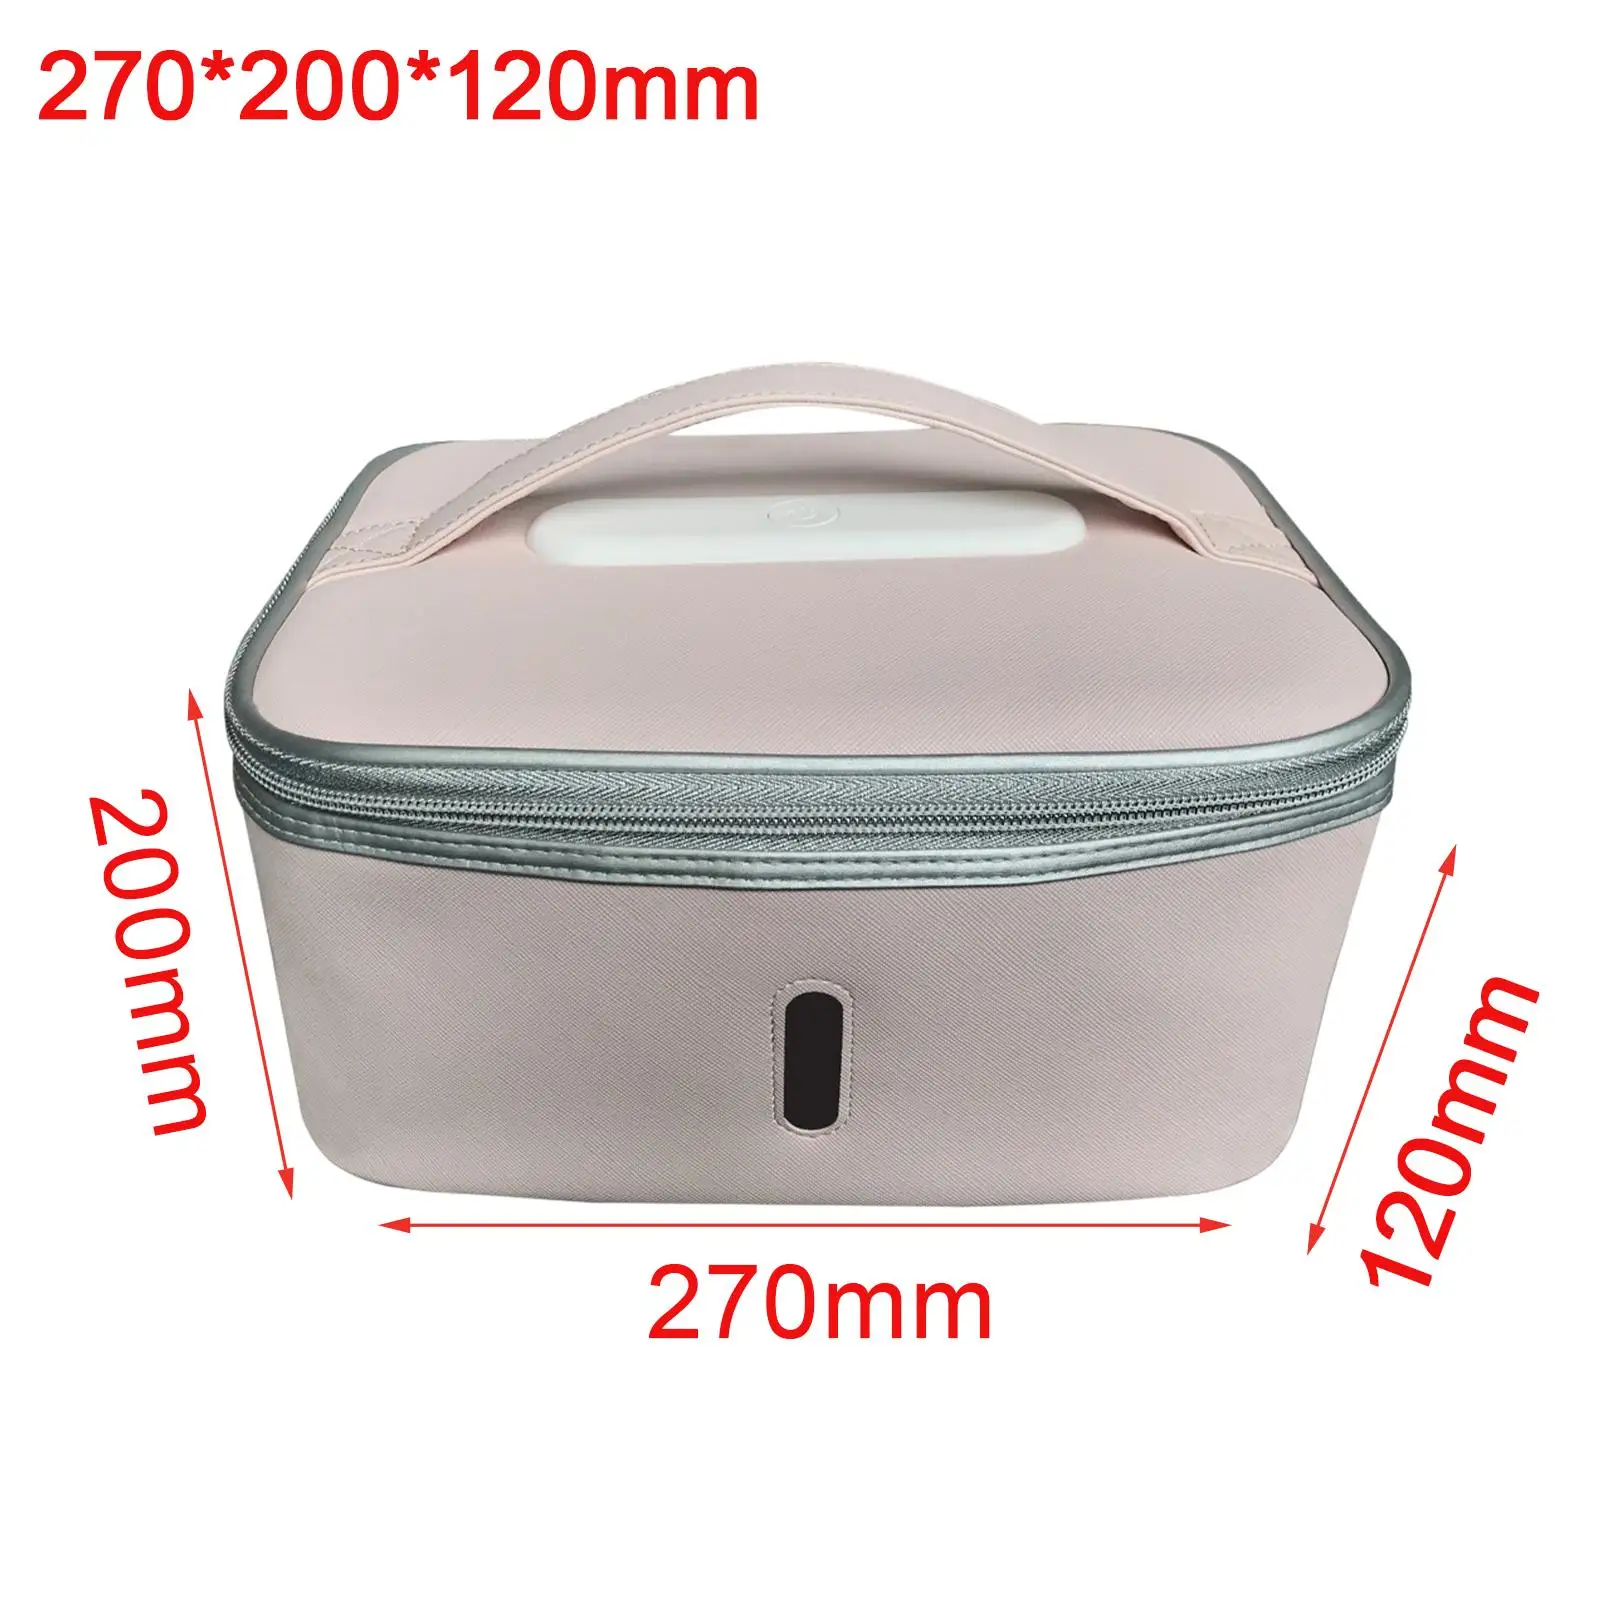 Ultraviolet Disinfection Bag Ultraviolet Cleaner Box for Cellphones Underwear Beauty Tool Salon Barber Nail Tools Baby Products